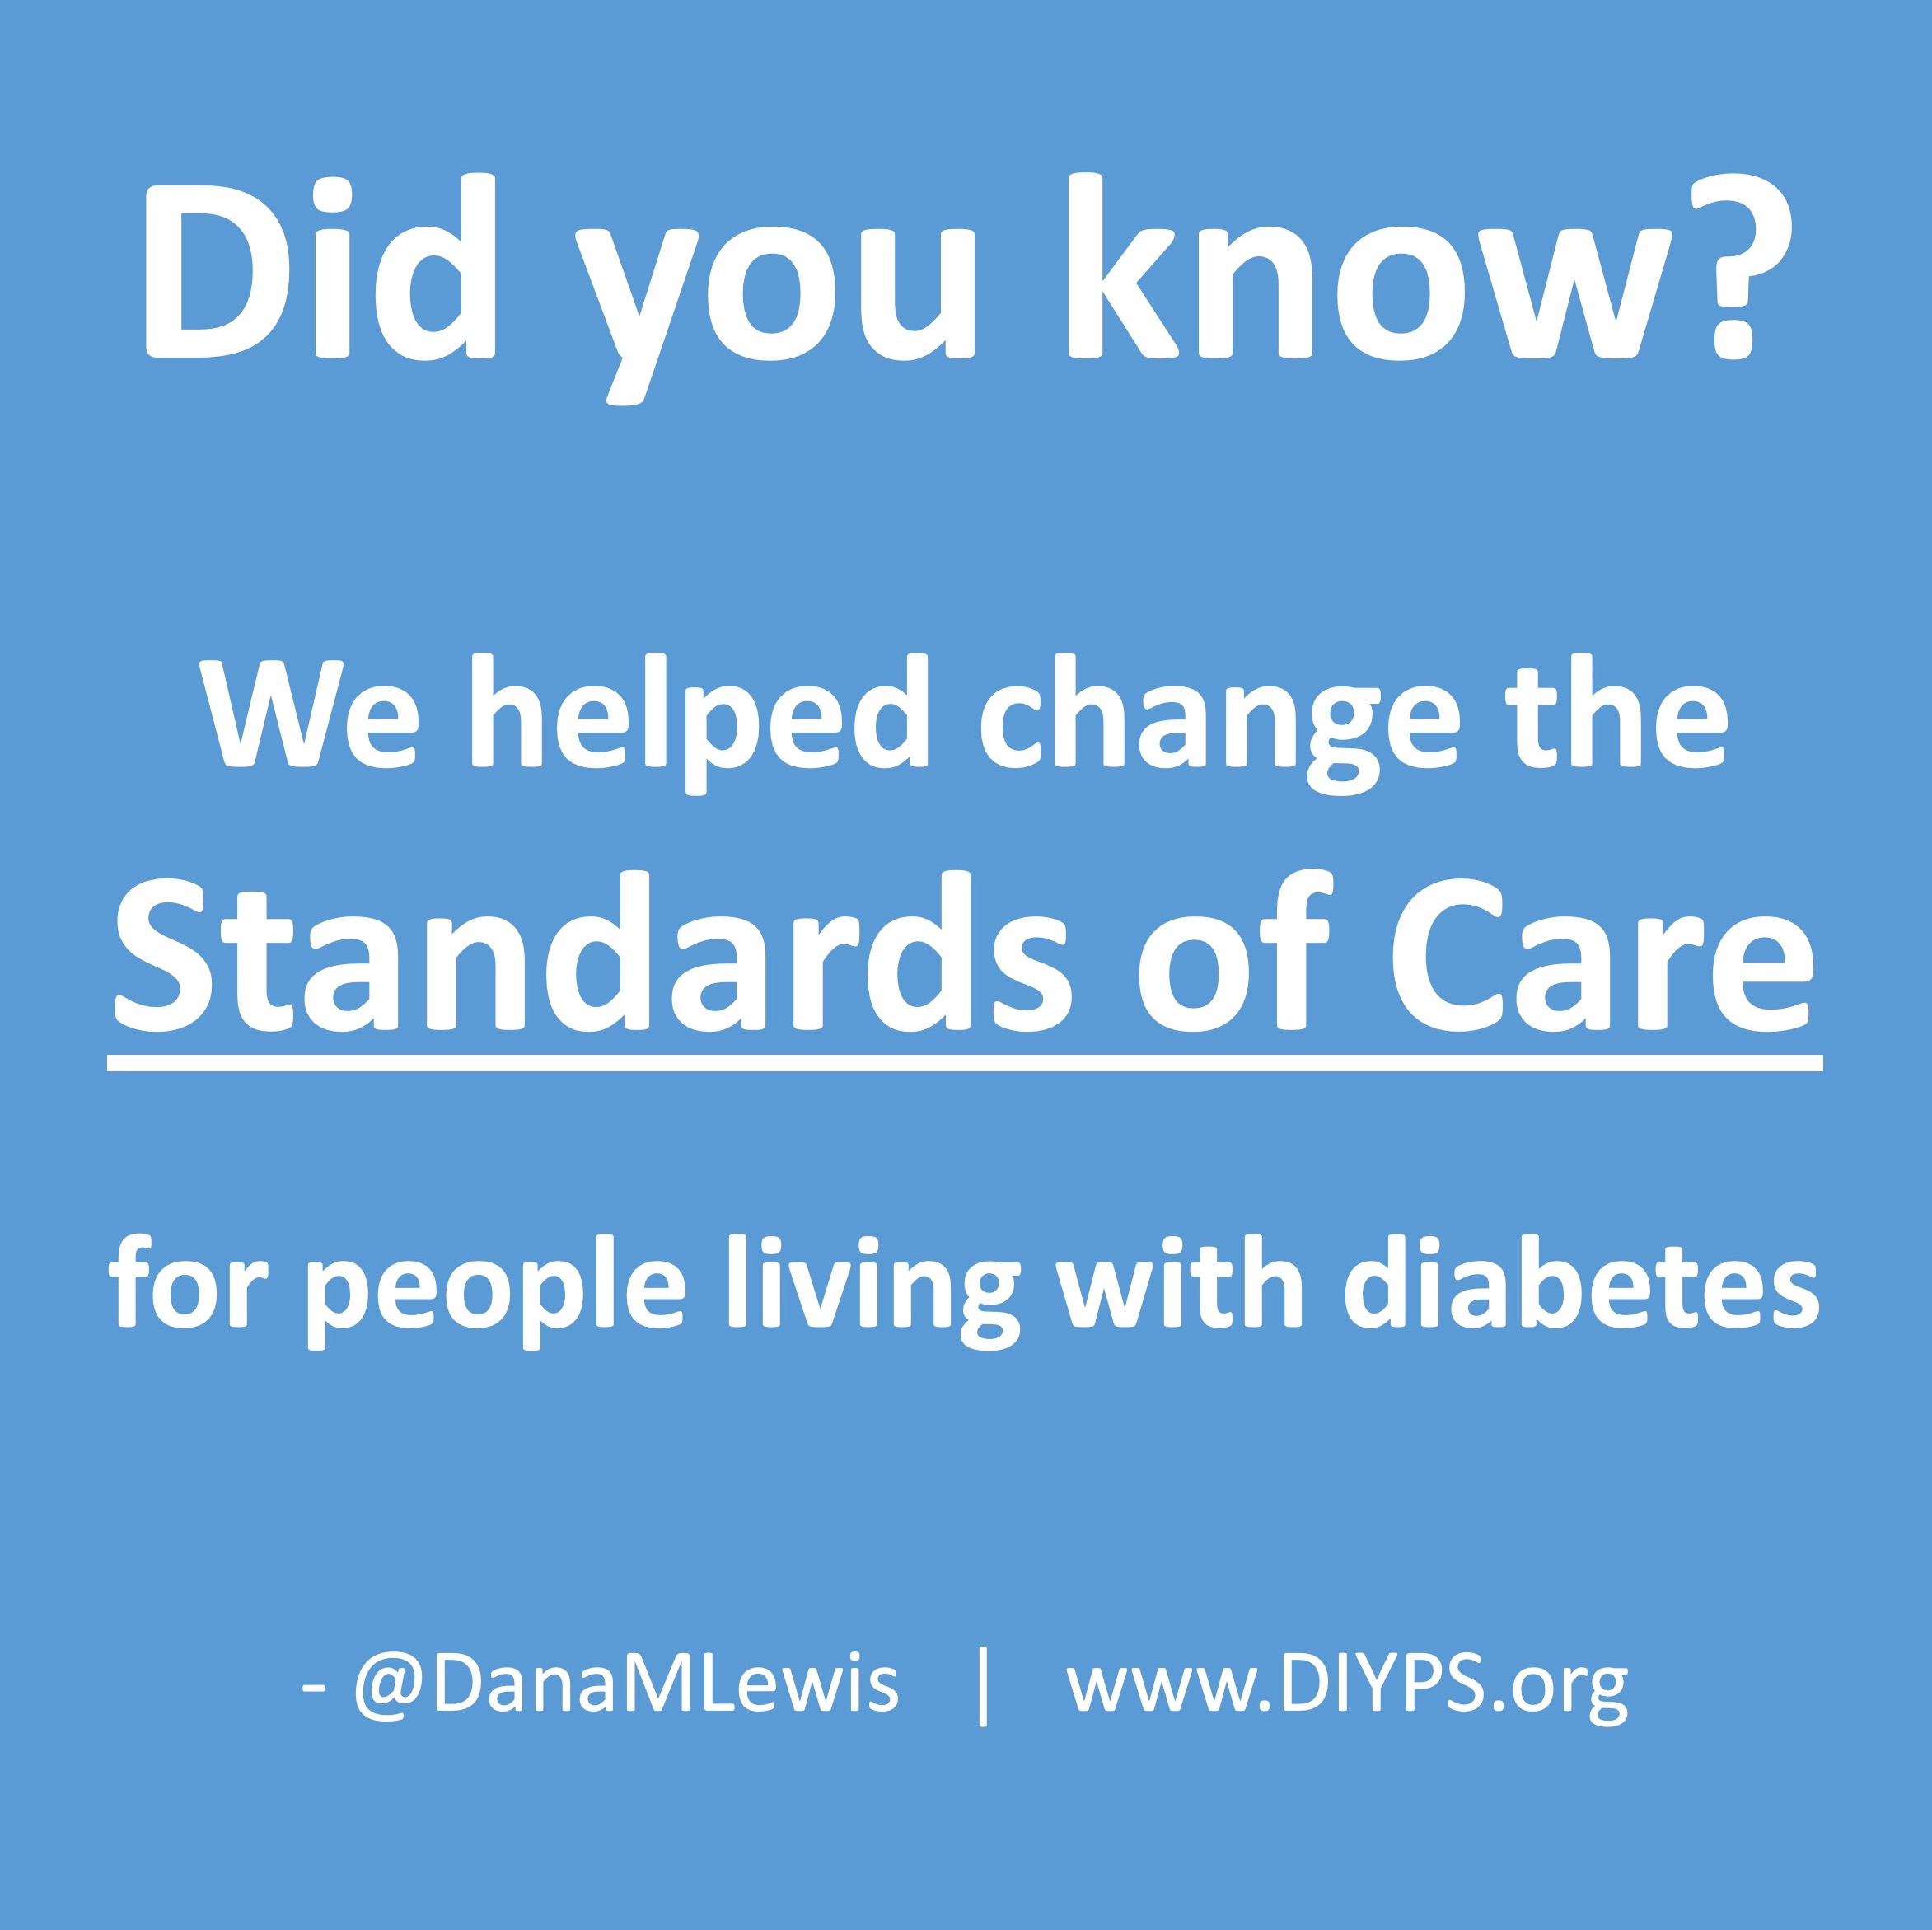 Did you know? We helped change the standards of care for people living with diabetes. By Dana M. Lewis from DIYPS.org